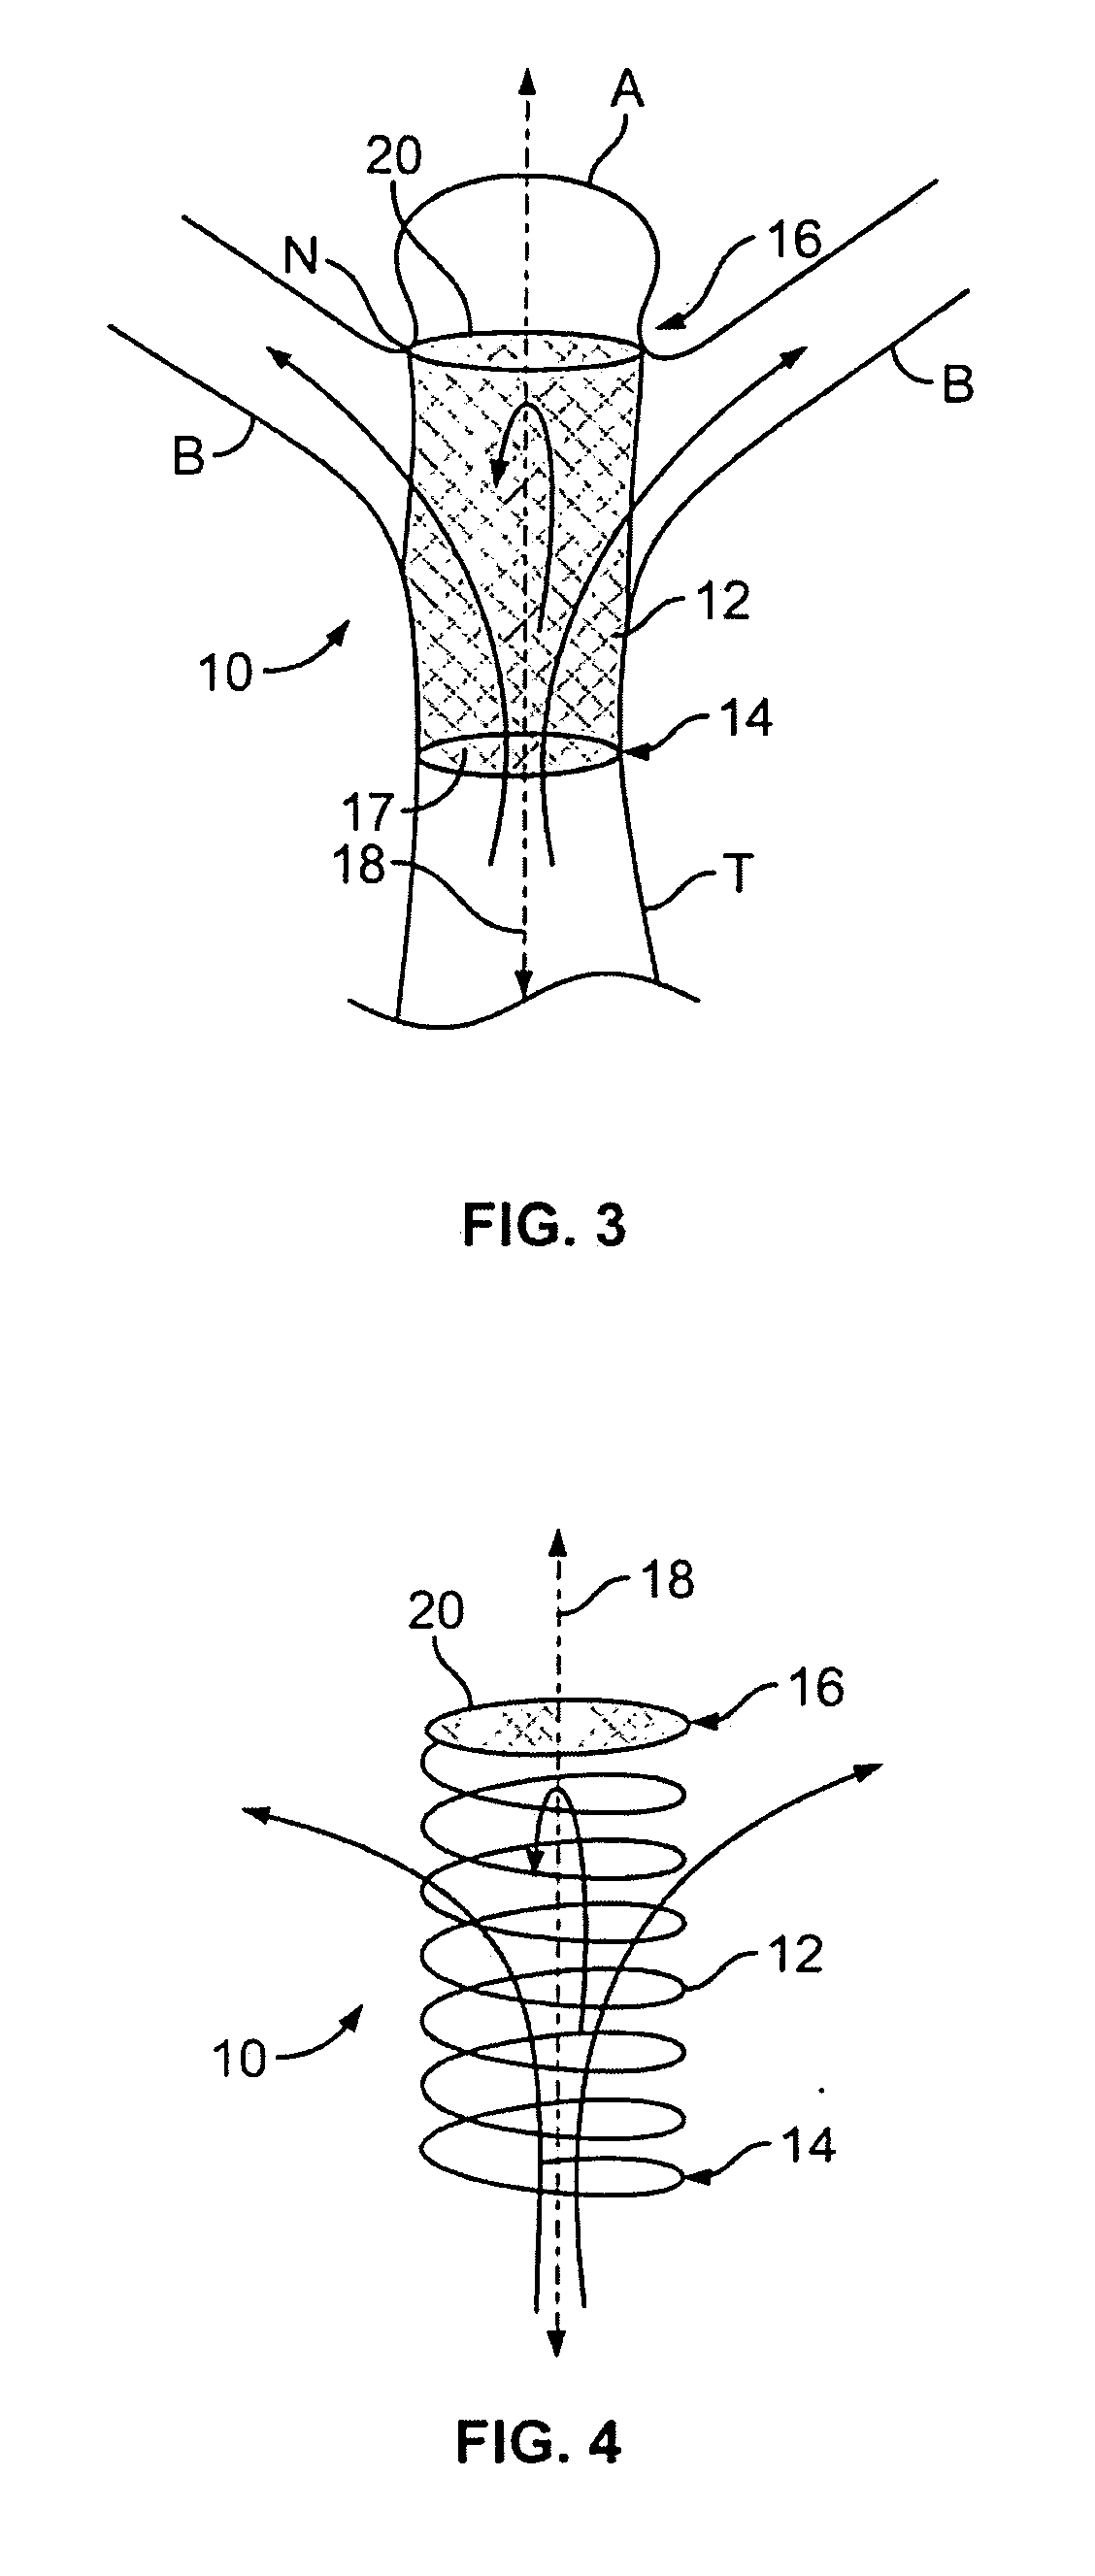 Isolation devices for the treatment of aneurysms